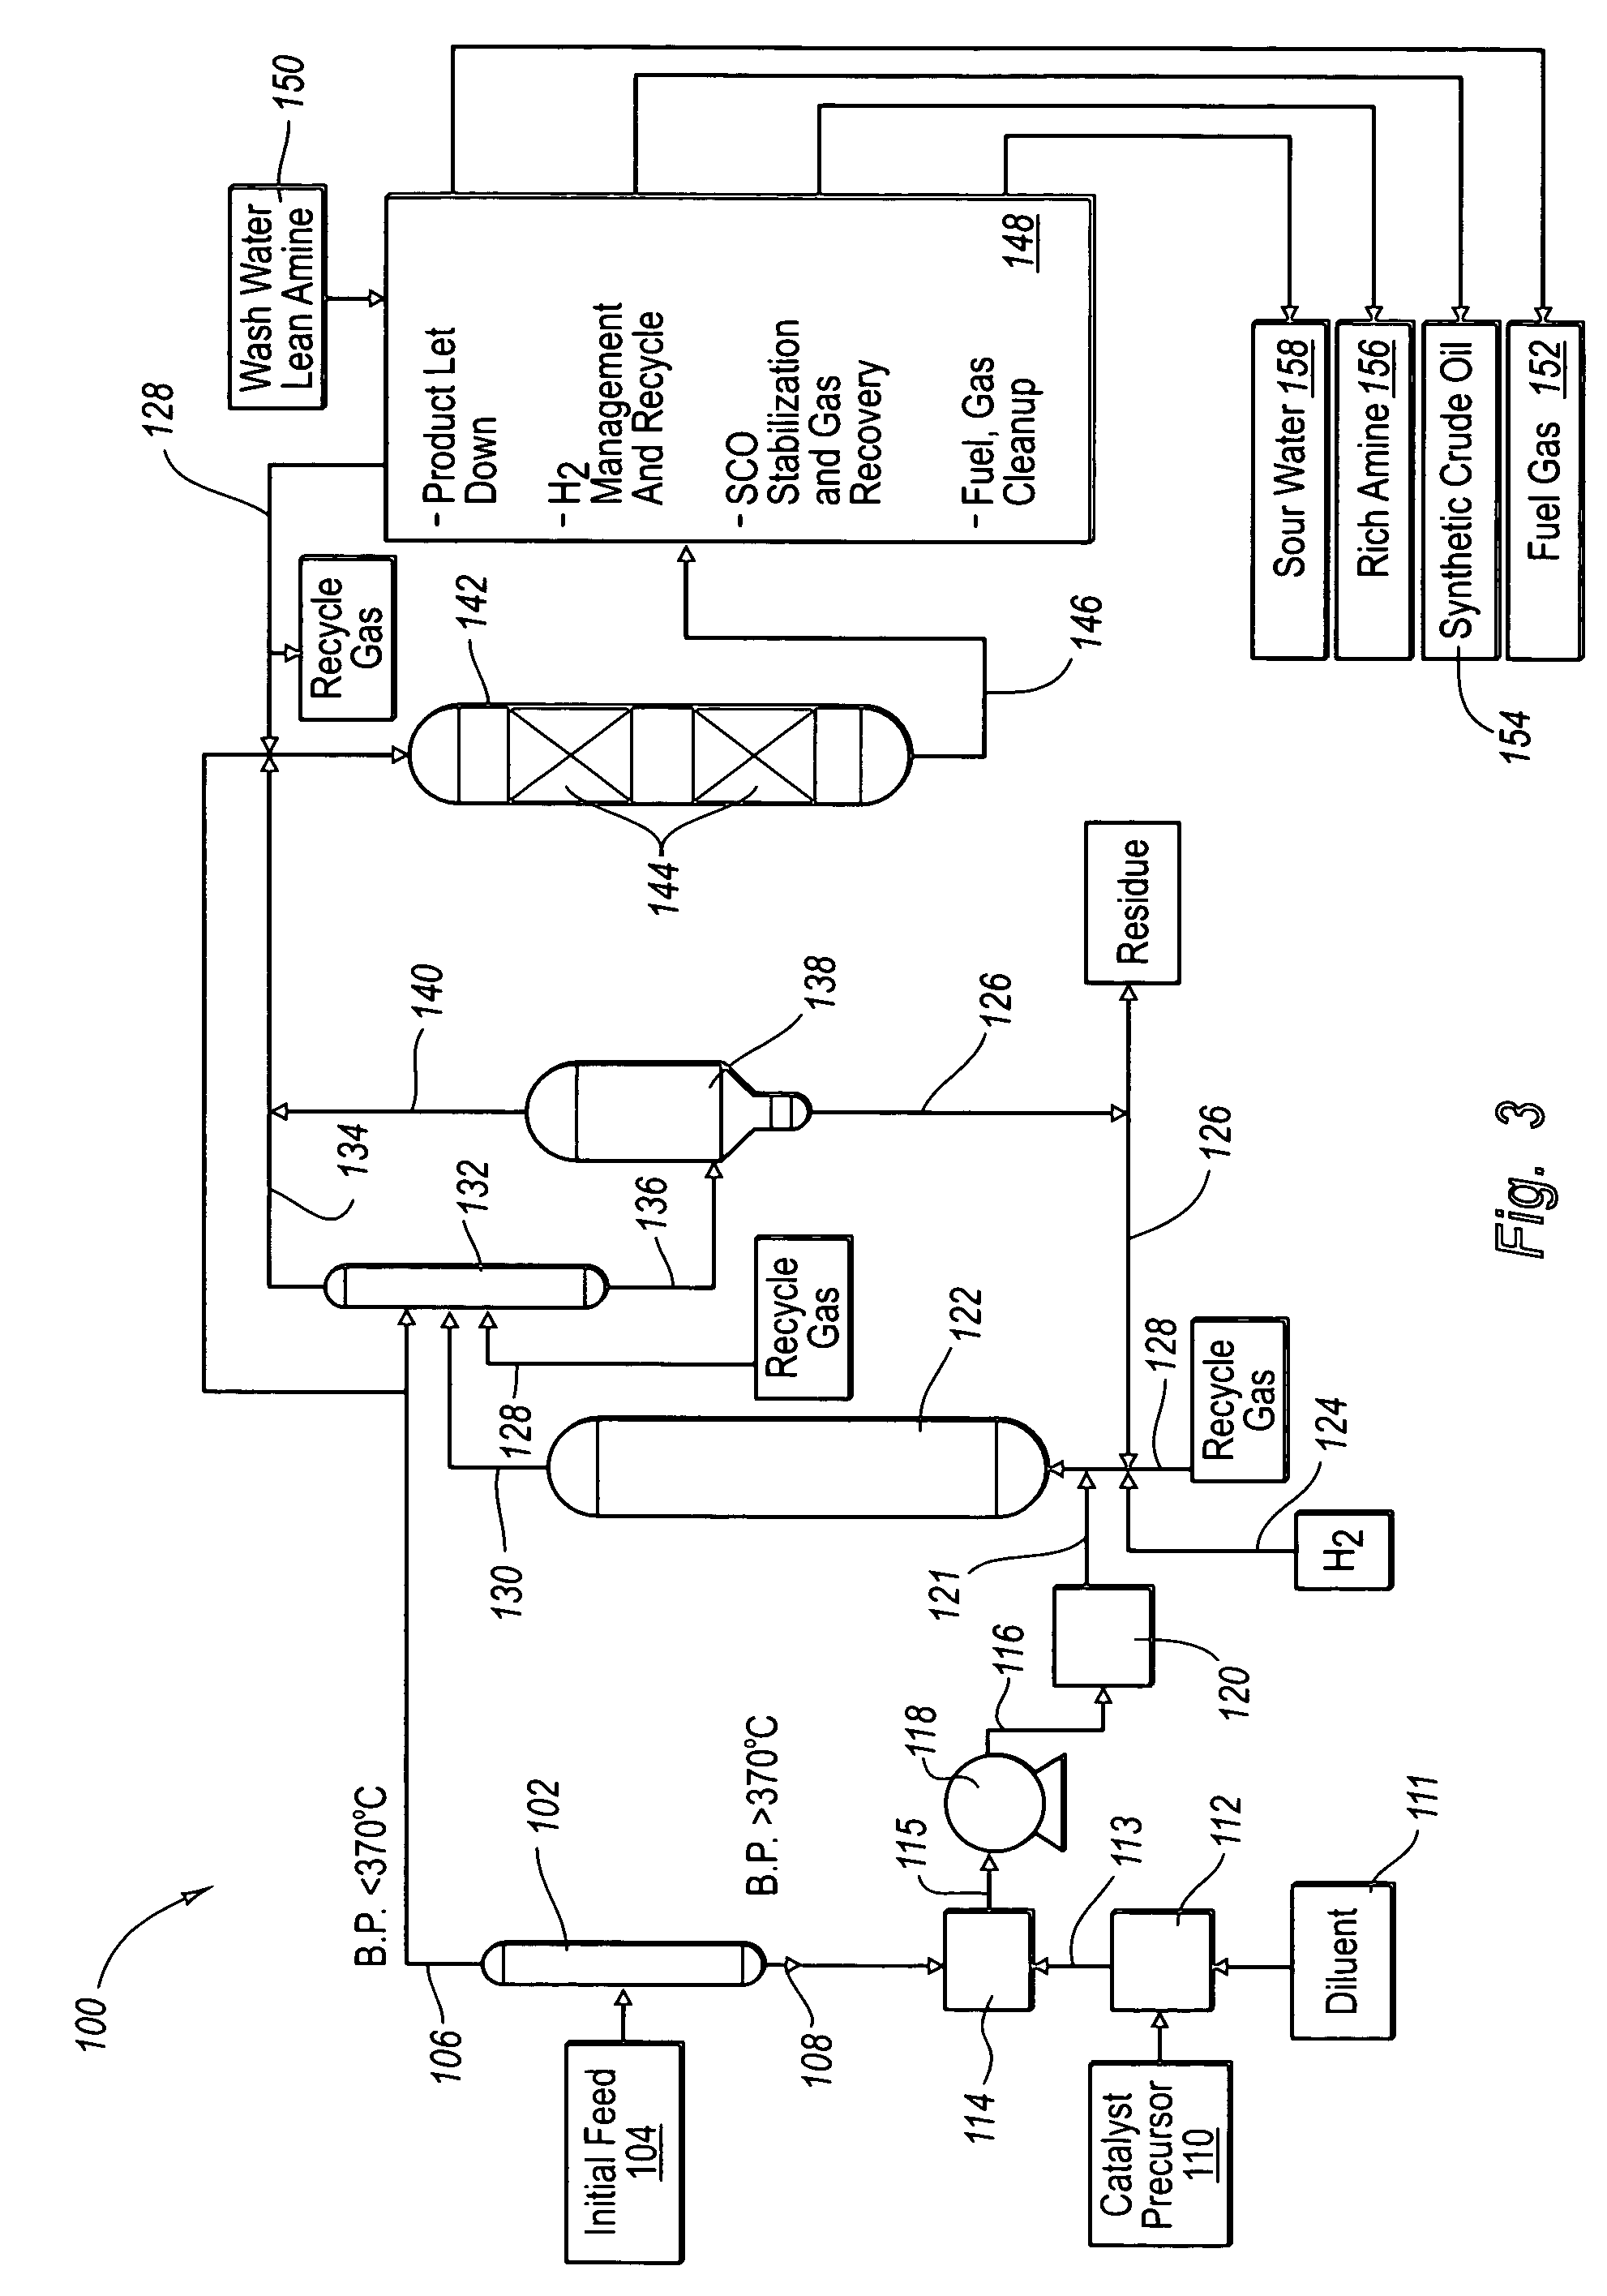 Hydroprocessing method and system for upgrading heavy oil using a colloidal or molecular catalyst